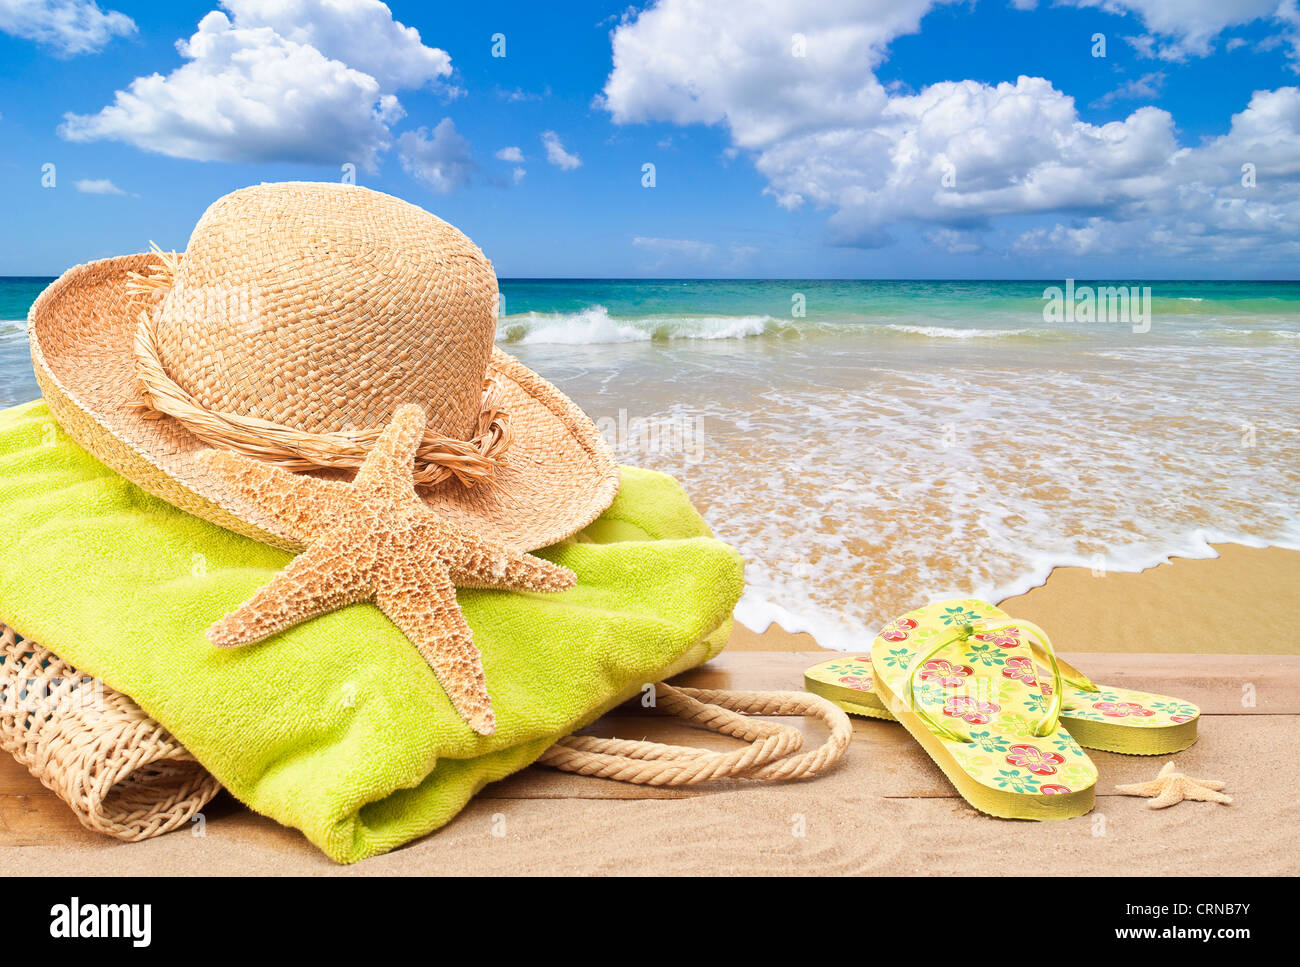 Beach bag with towel and sun hat overlooking the ocean Stock Photo